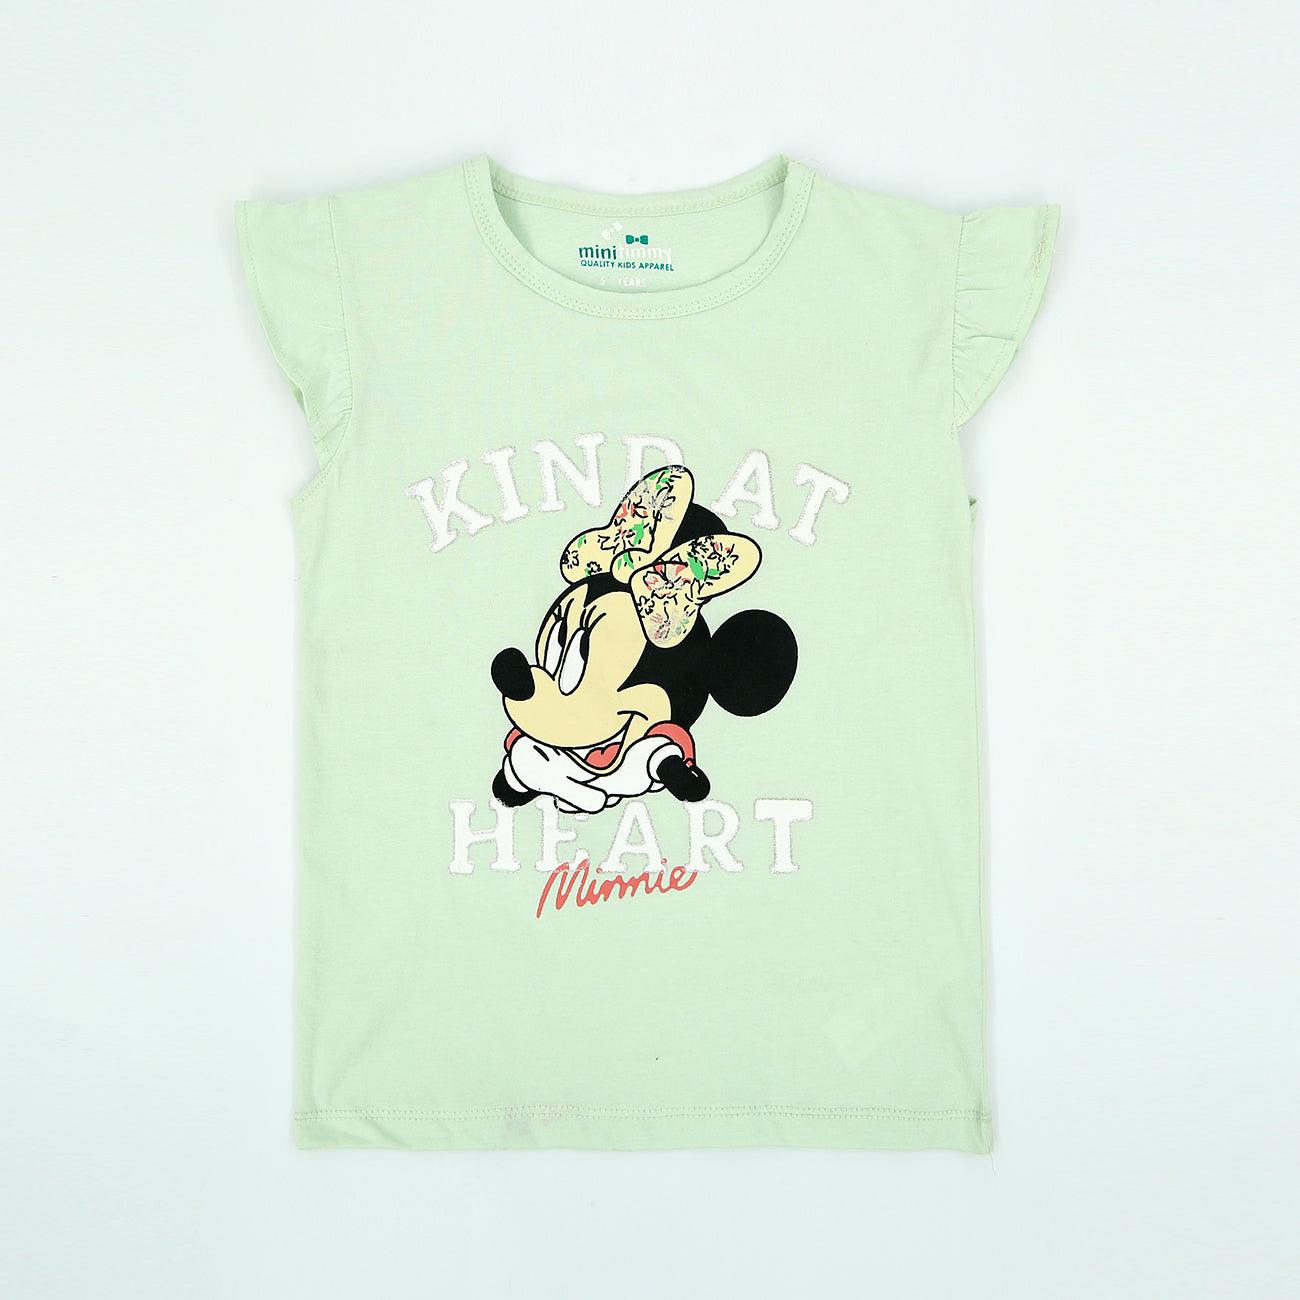 Girls Soft Cotton Minnie Mouse Printed T-Shirt 9 MONTH - 10 YRS (MI-11409) - Brands River